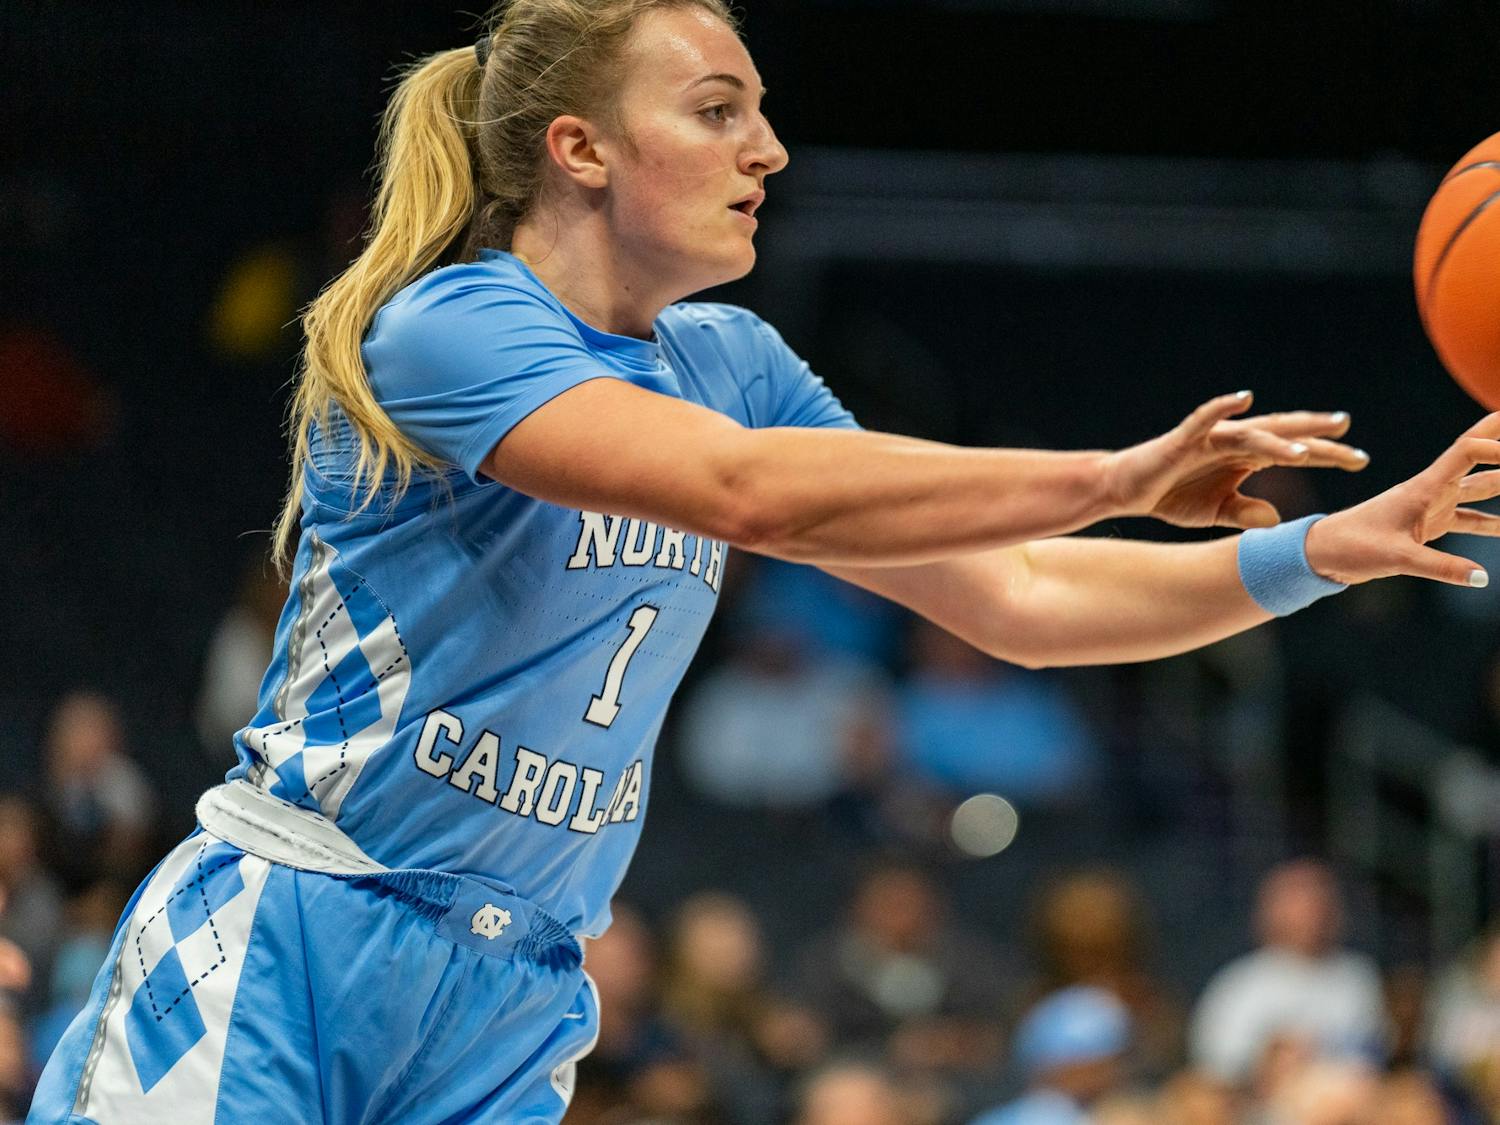 UNC junior guard Alyssa Ustby (1) passes the ball during the women’s basketball game against Michigan at the Jumpman Invitational on Tuesday, Dec. 20, 2022, at the Spectrum Center. UNC fell to Michigan 76-68.